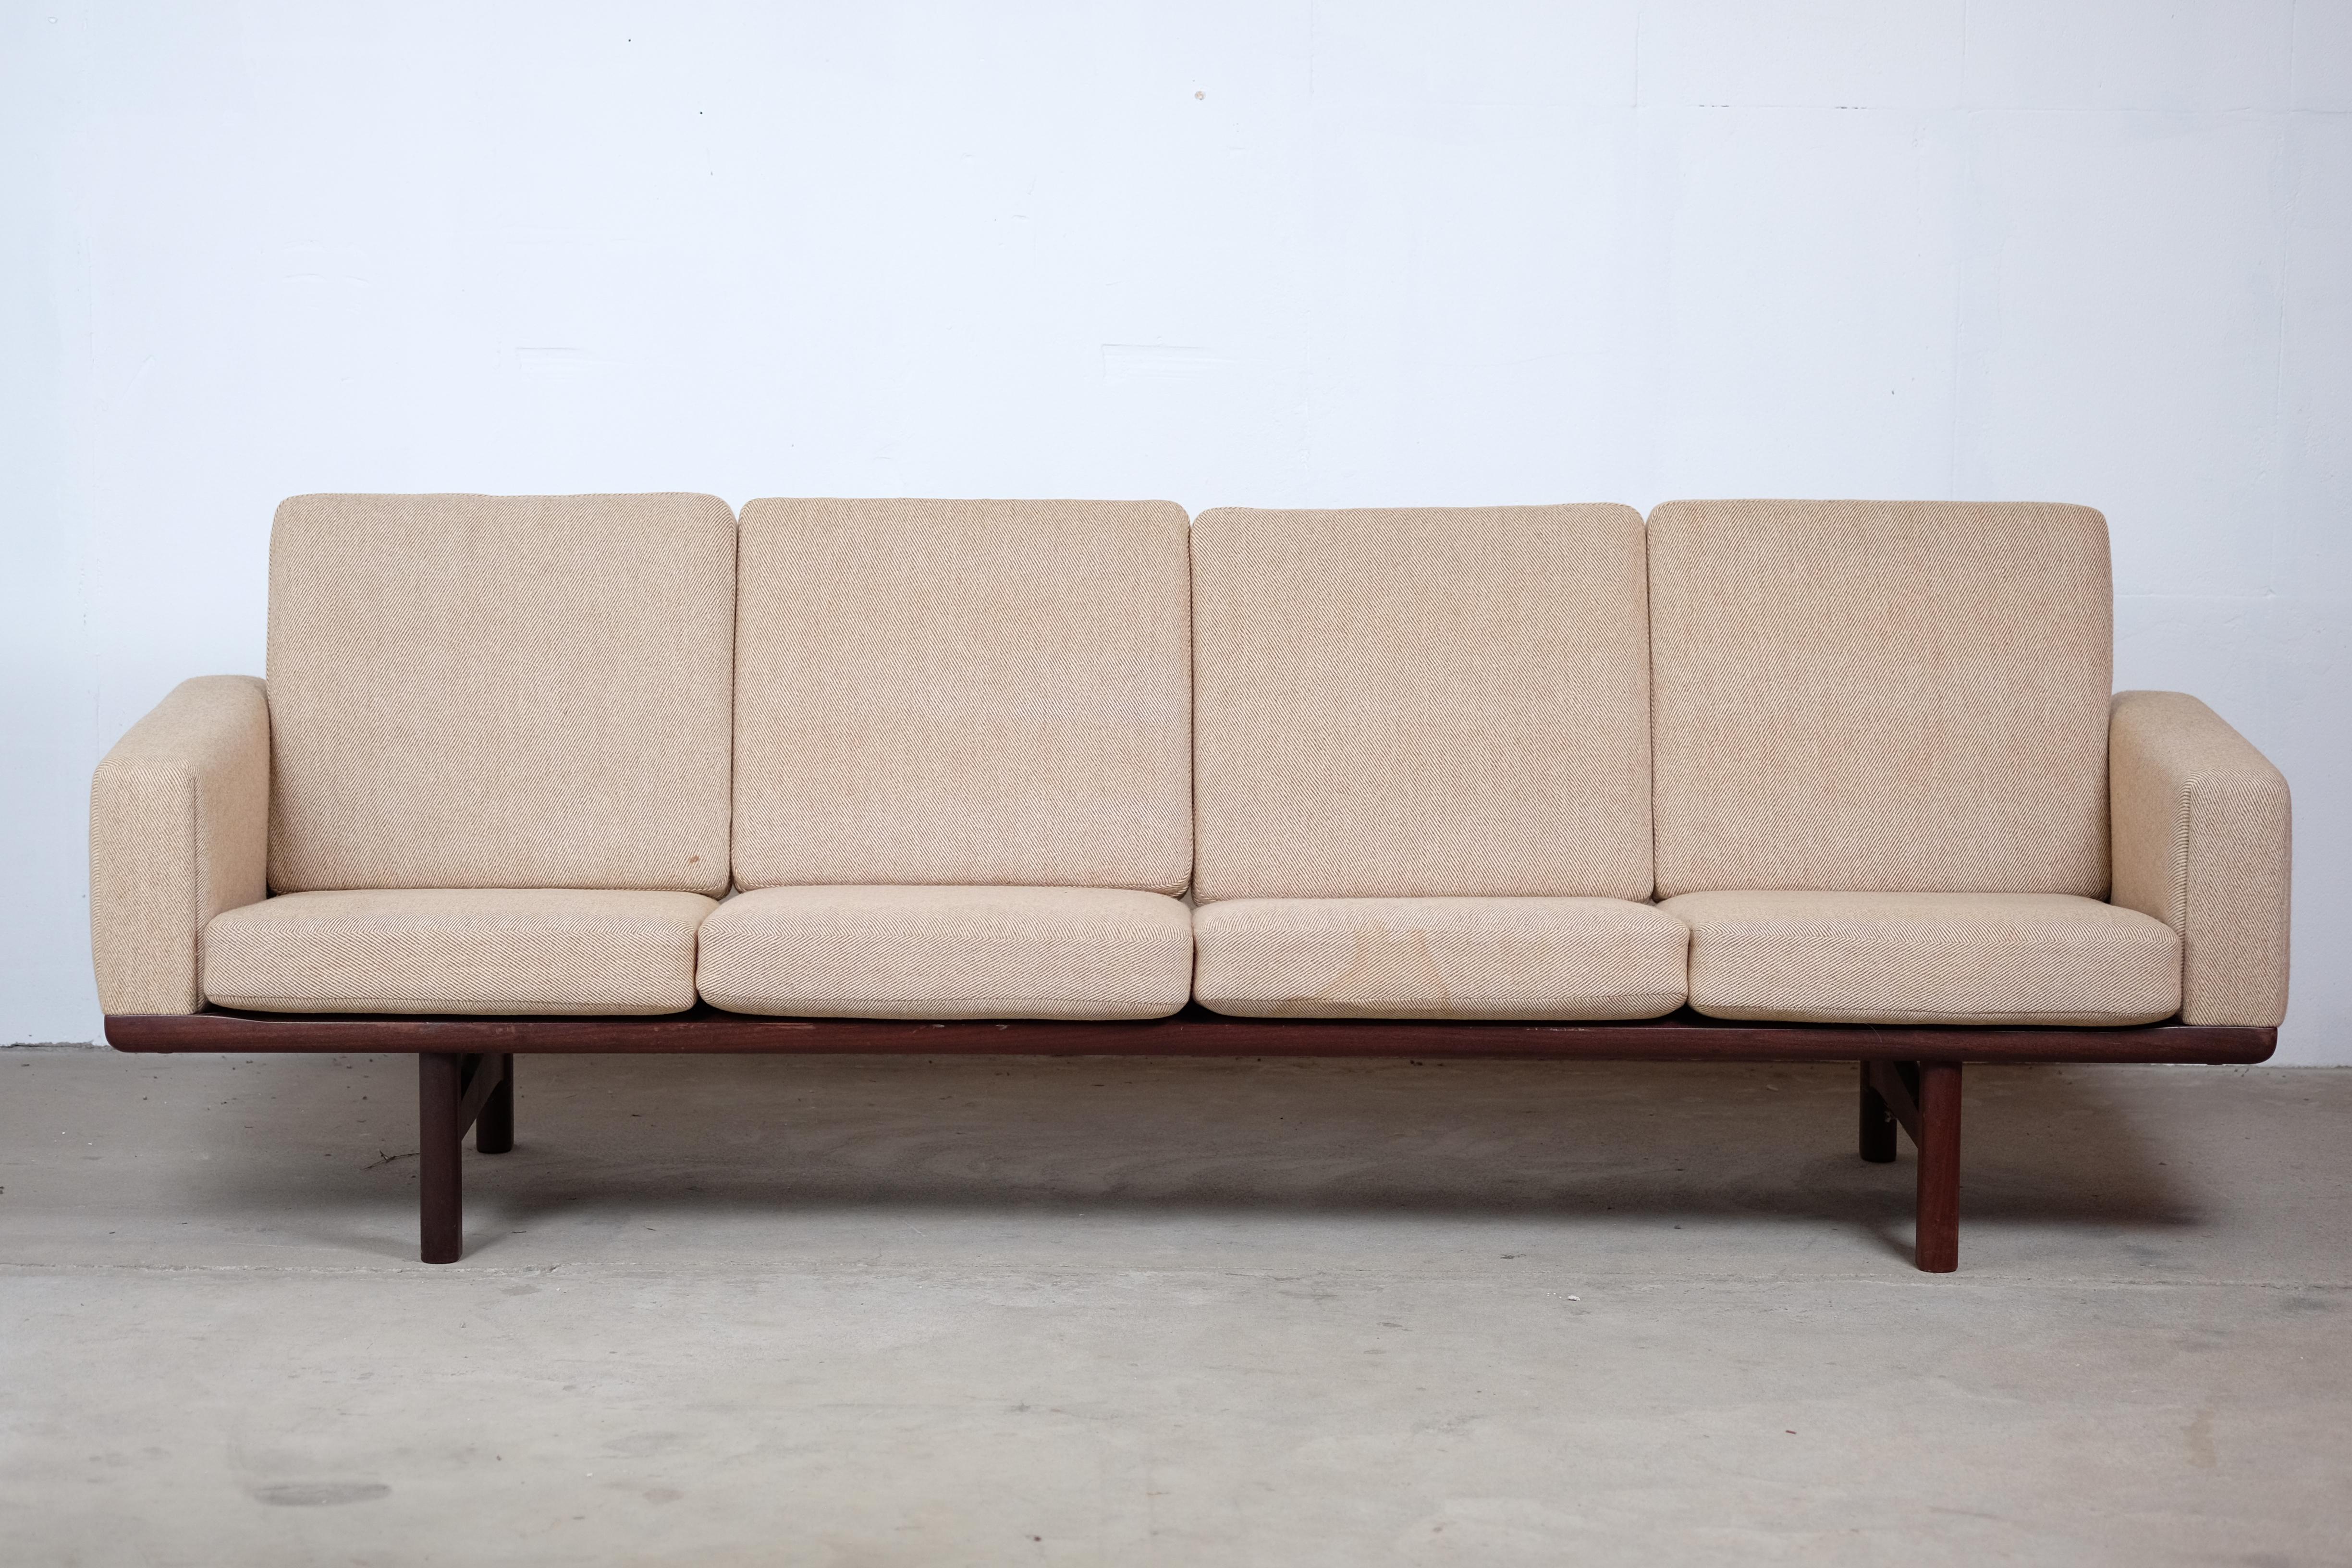 An great sofa designed by Hans Wegner for GETAMA Gedsted. This sofa's versatility made it to one of Wegner's most popular sofa designs. The rear of the sofa is absolutely beautiful. The angled posts give this sofa its modern flare and are